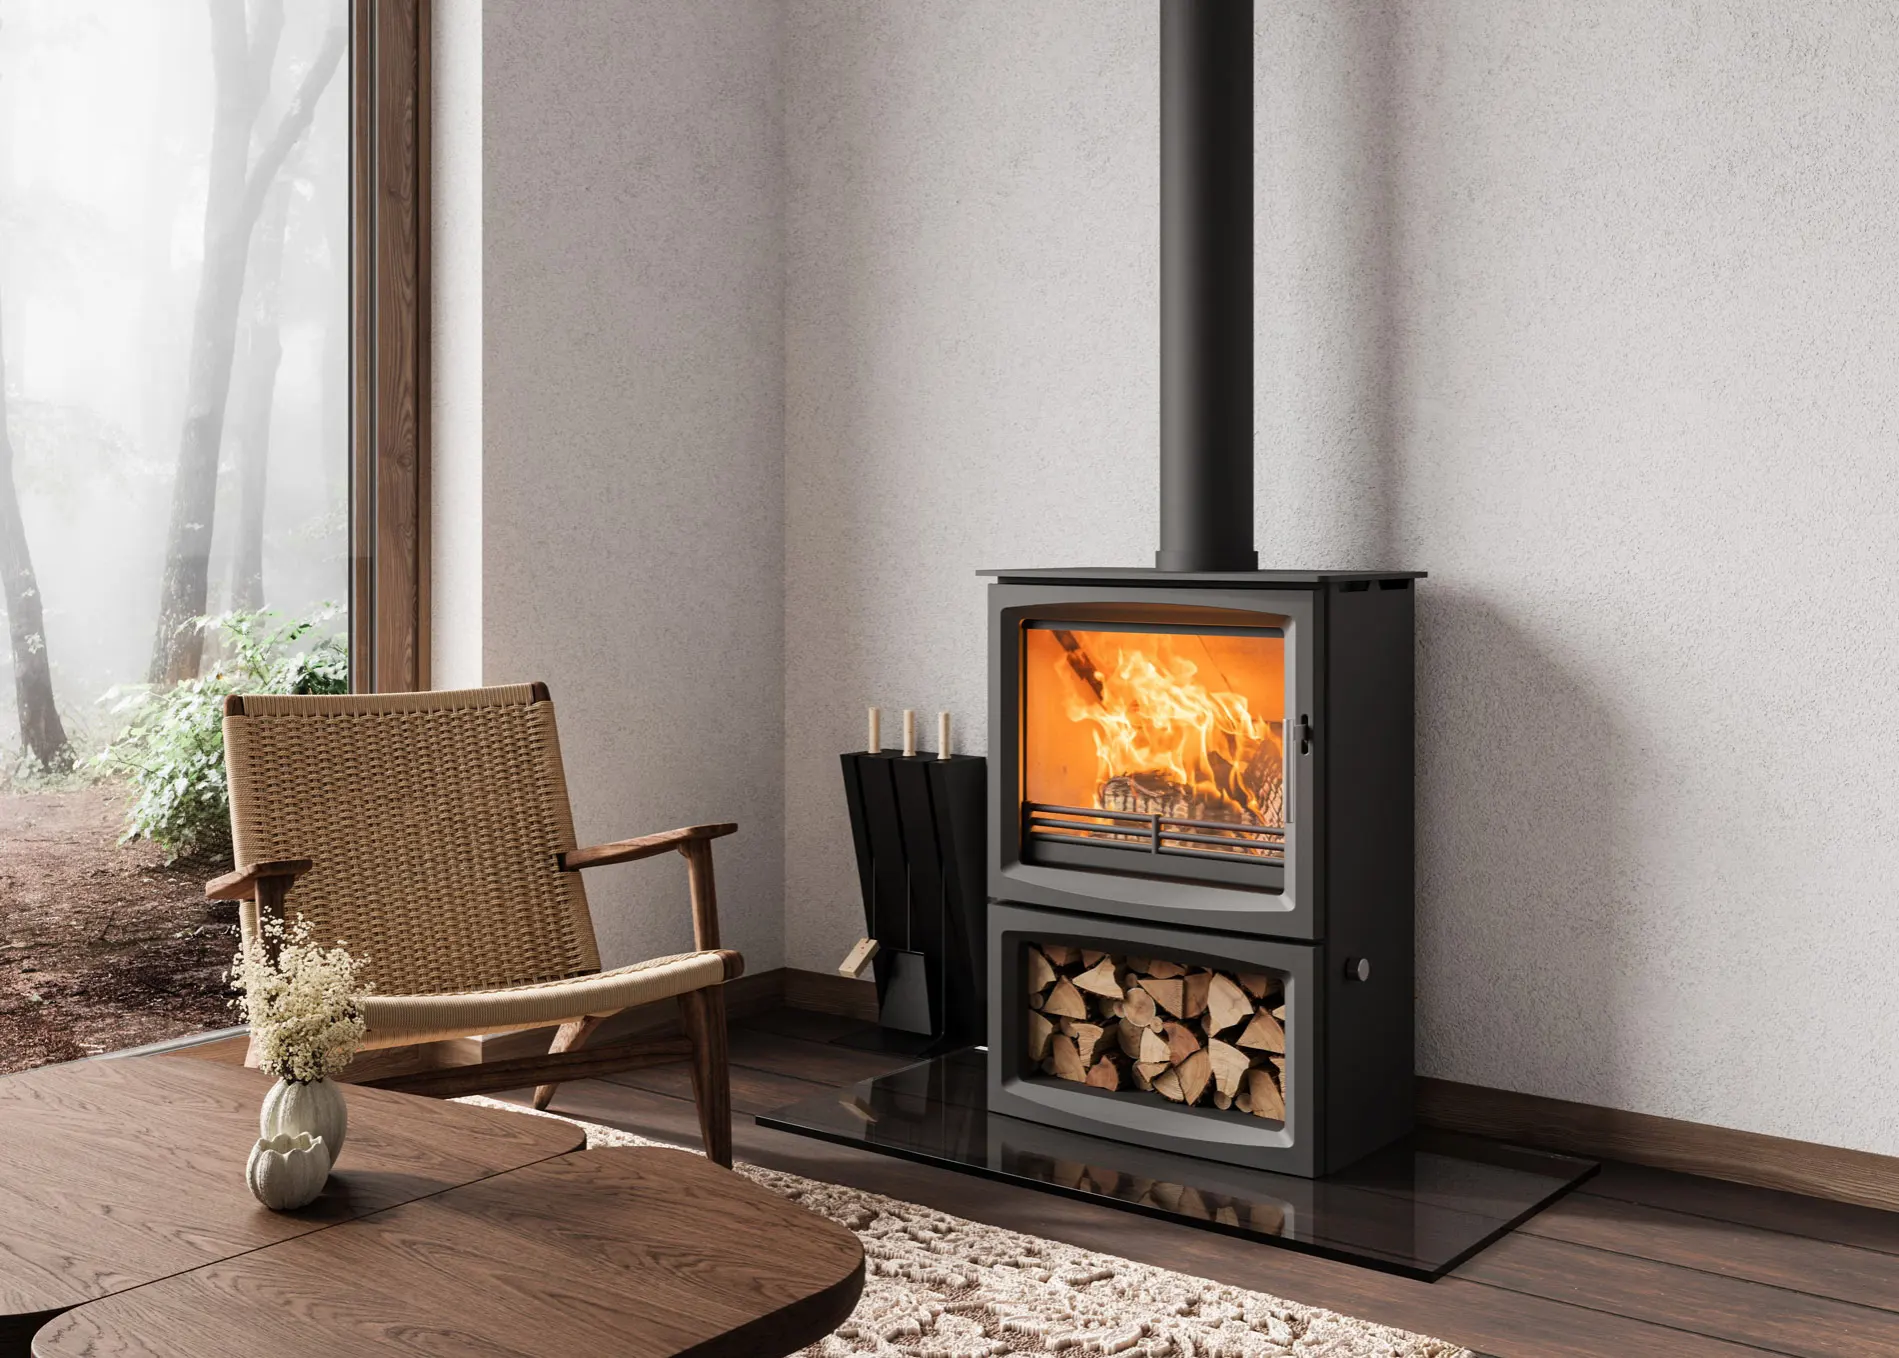 The online home of Ecosy+ stoves